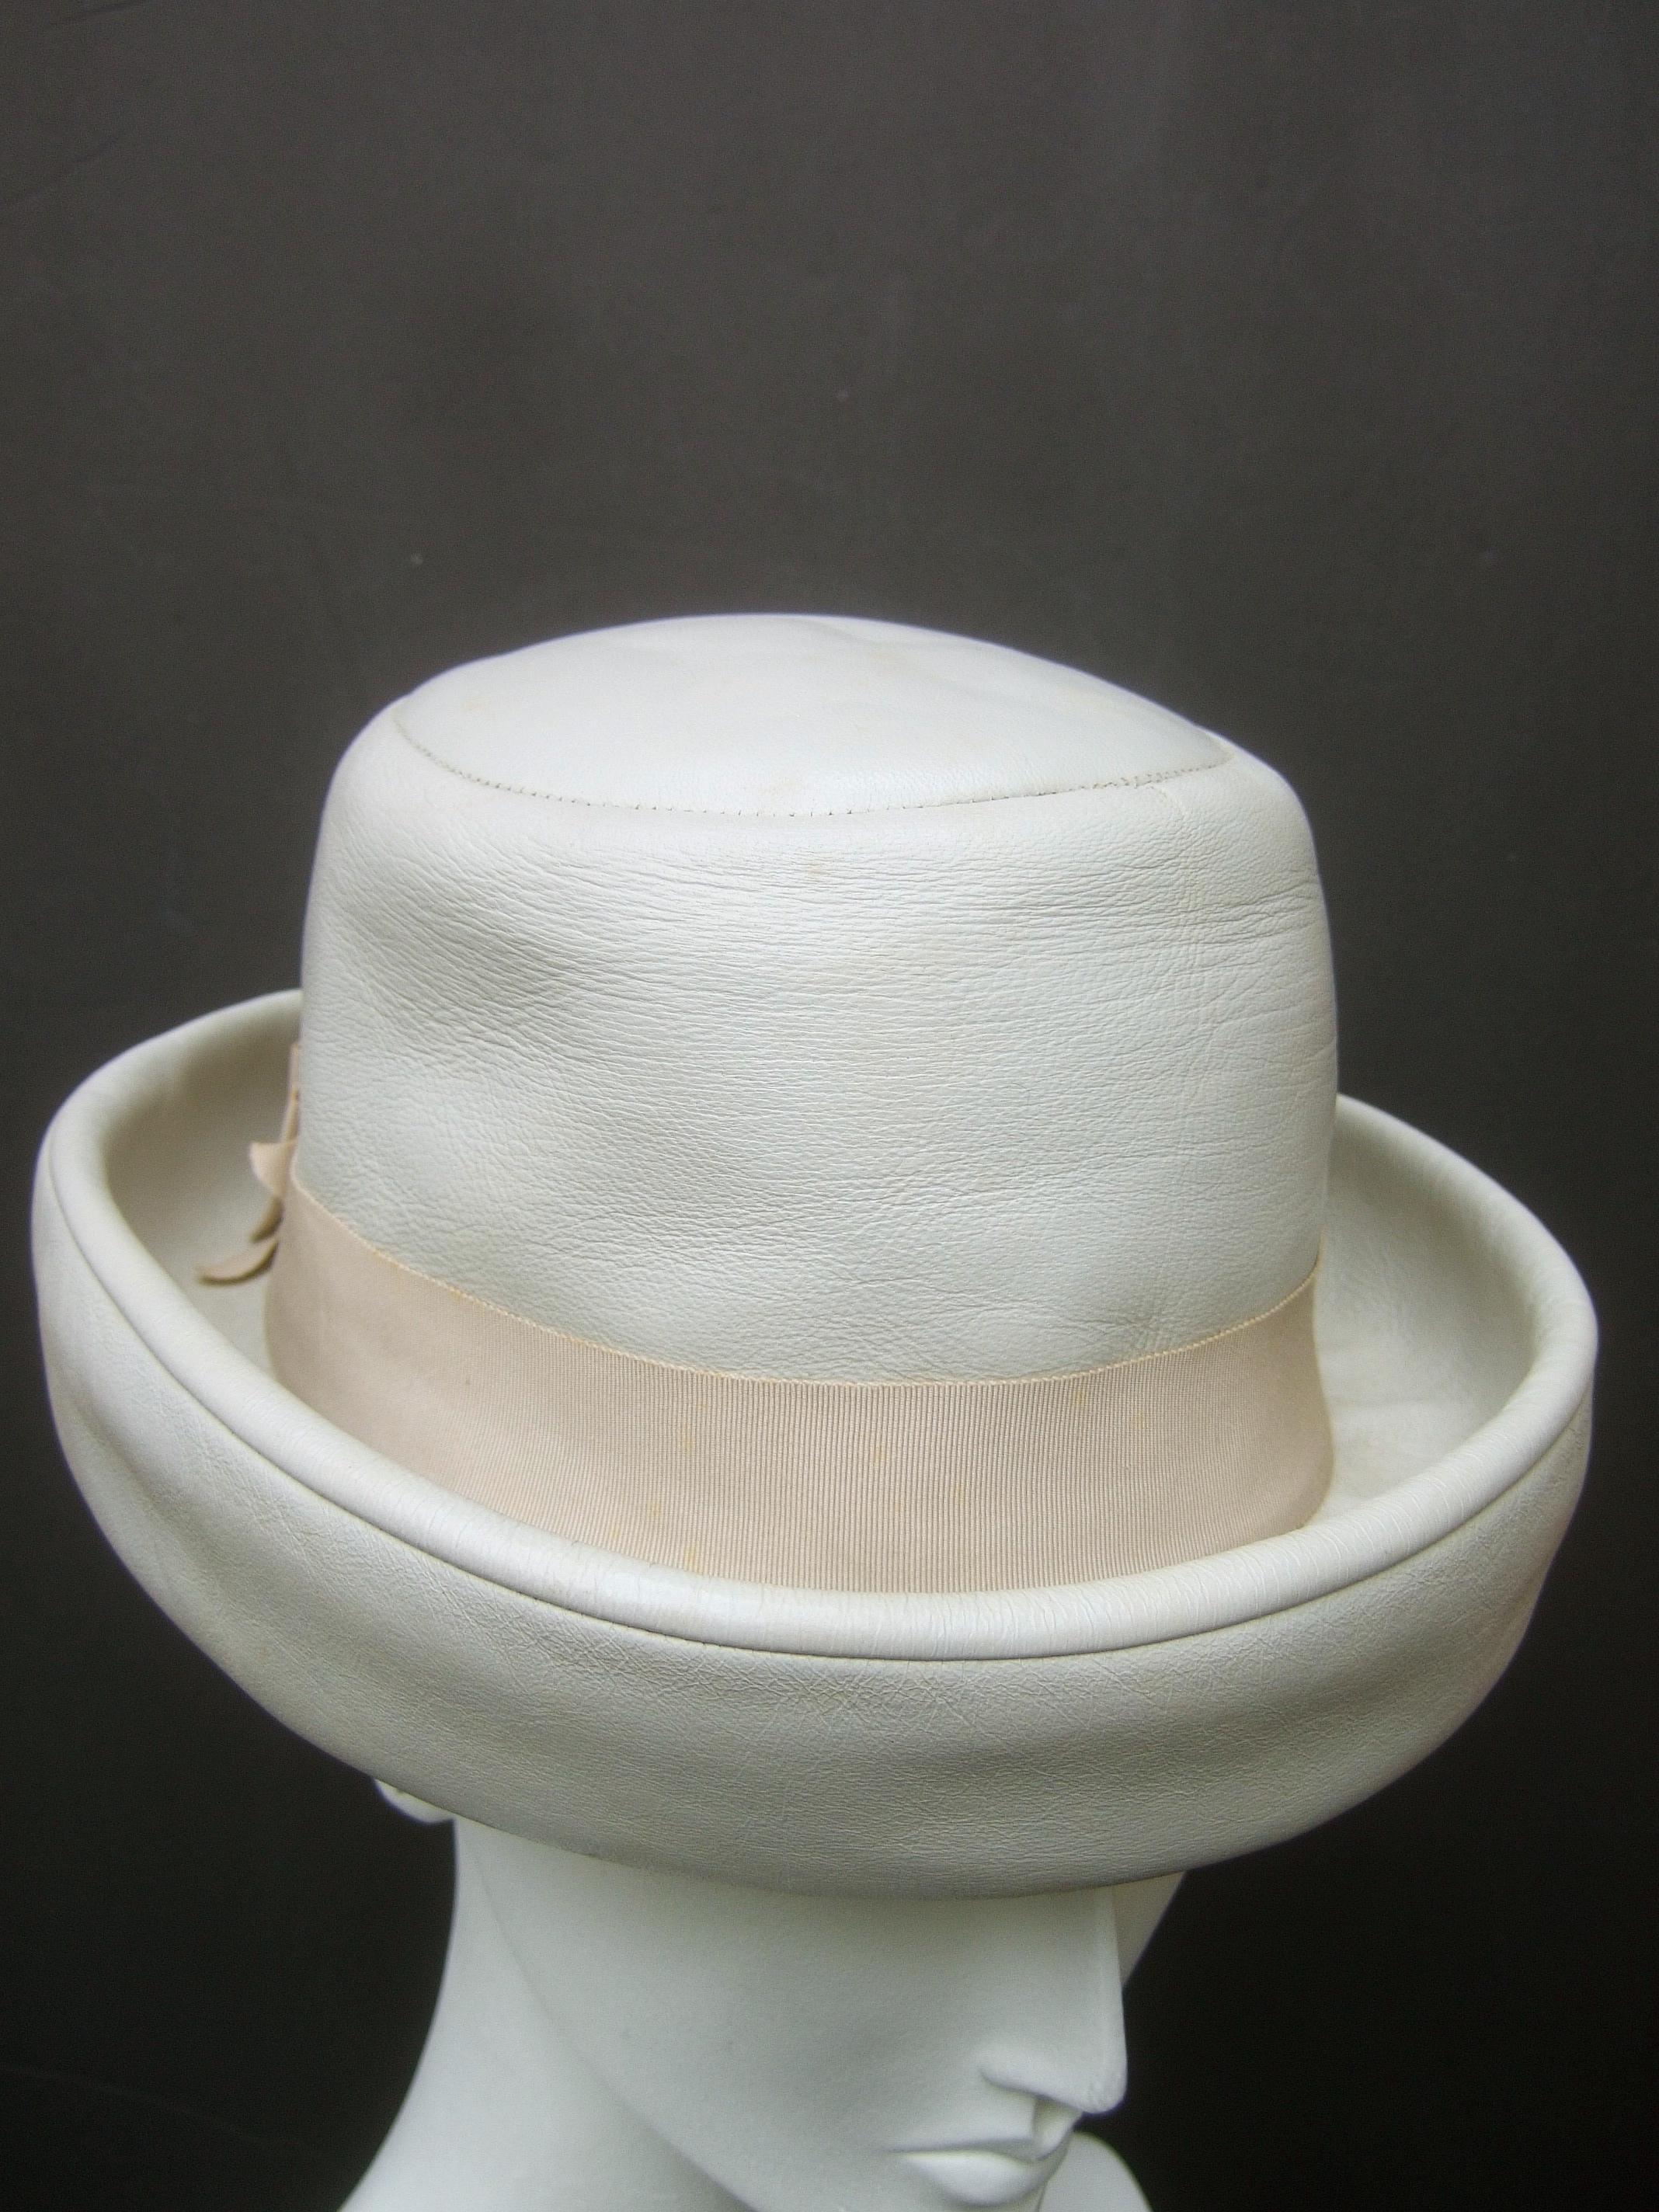 Yves Saint Laurent Chic Mod Leather Hat Circa 1970 For Sale 4